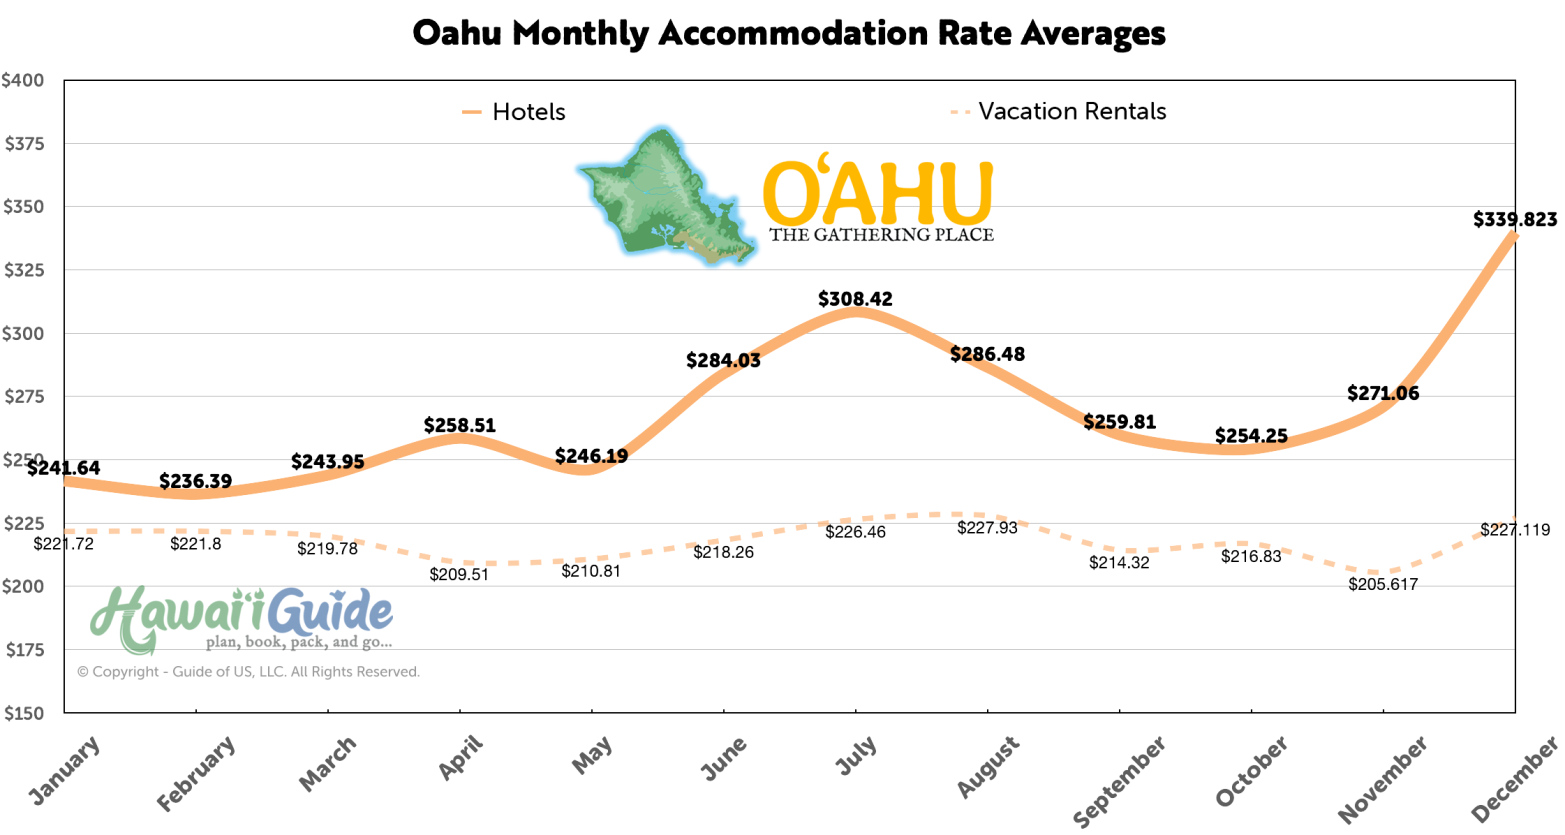 Oahu Accommodation Rate Averages (click to enlarge)